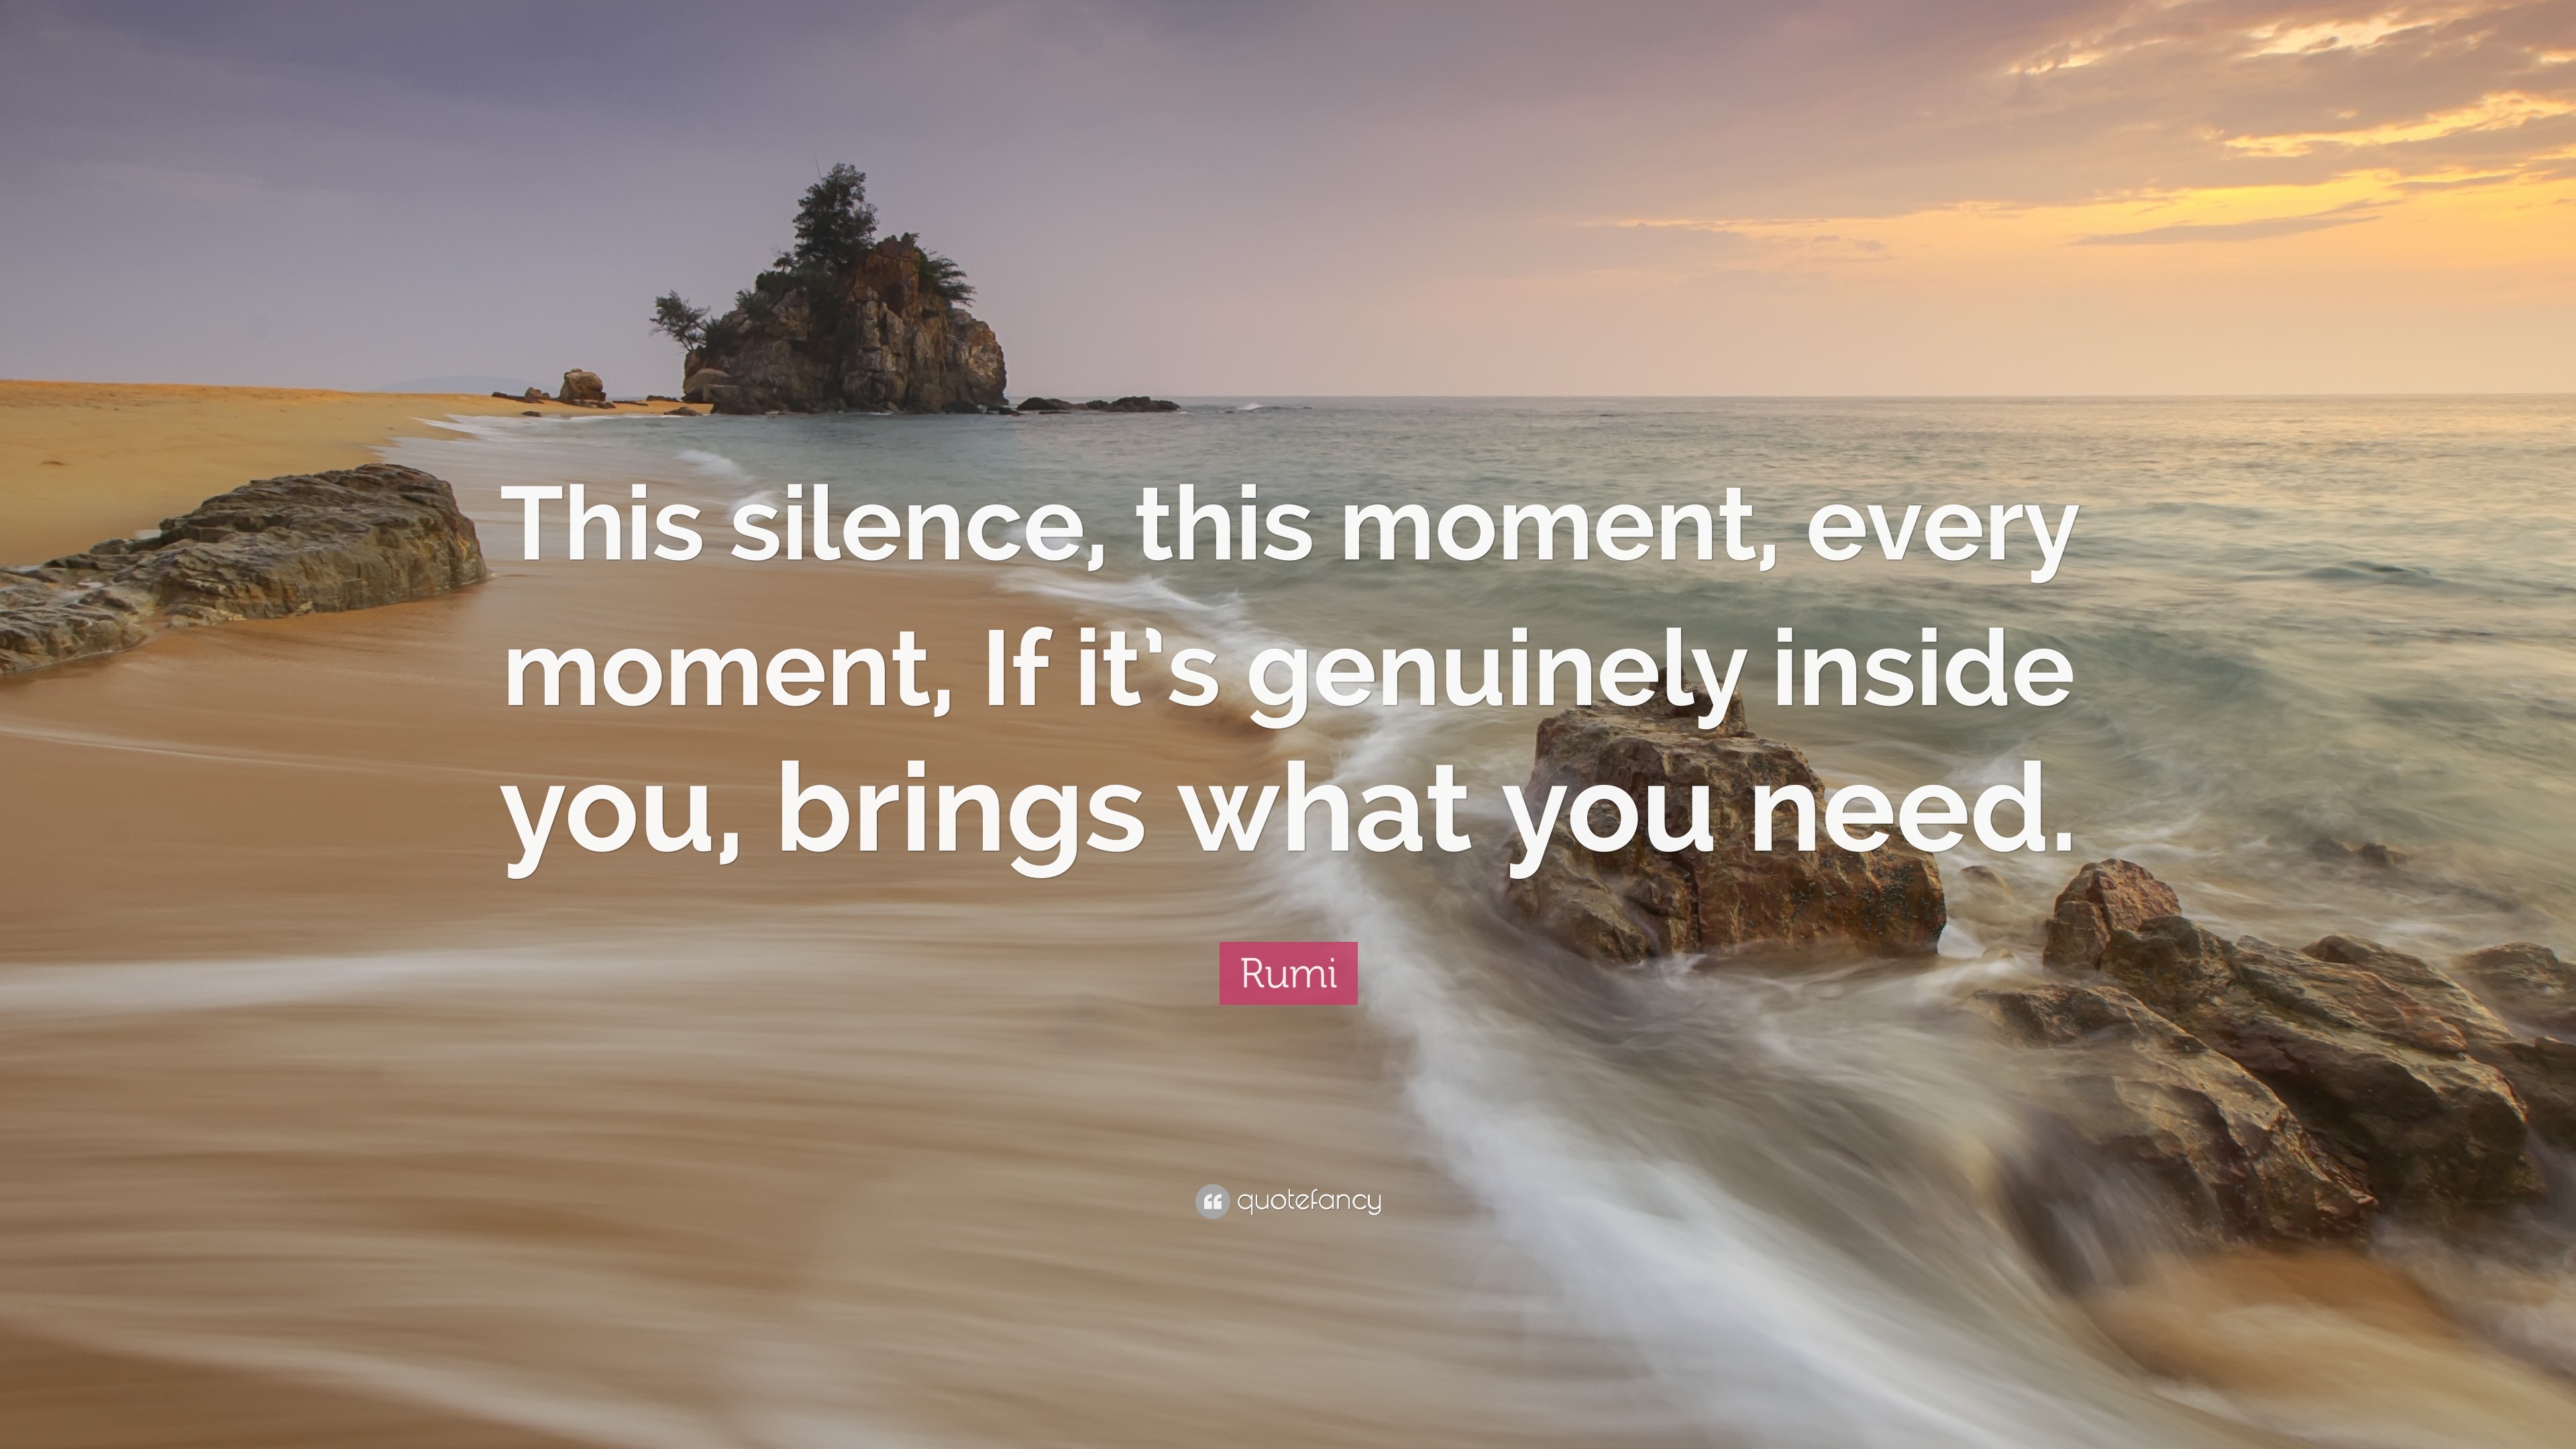 Rumi Quote “this Silence This Moment Every Moment If Its Genuinely